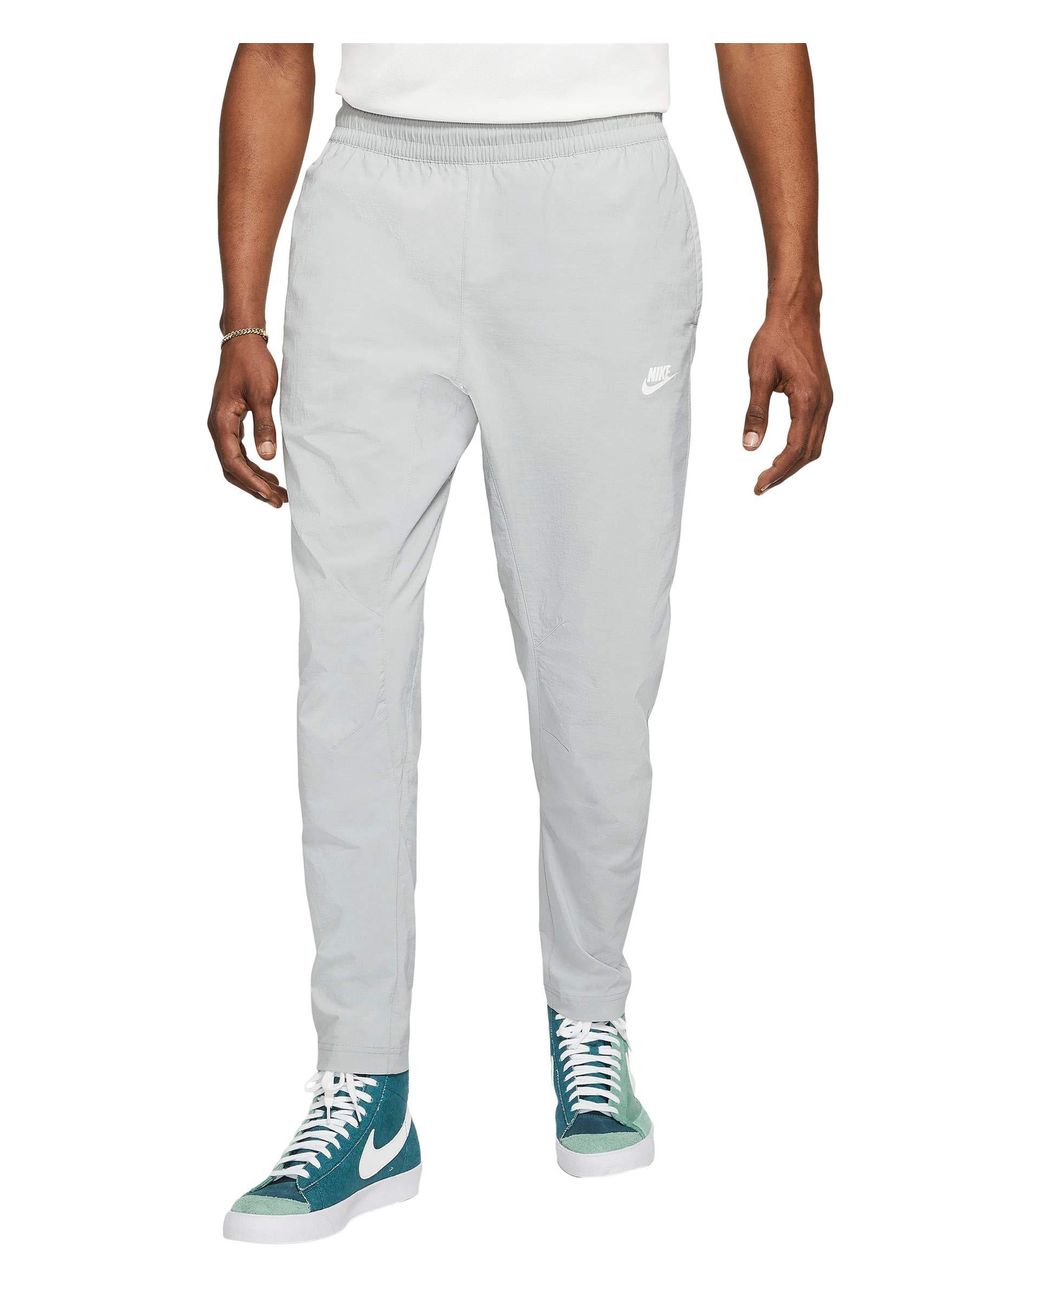 Nike Synthetic Nsw Ul Woven Pants Utility in Gray for Men - Lyst